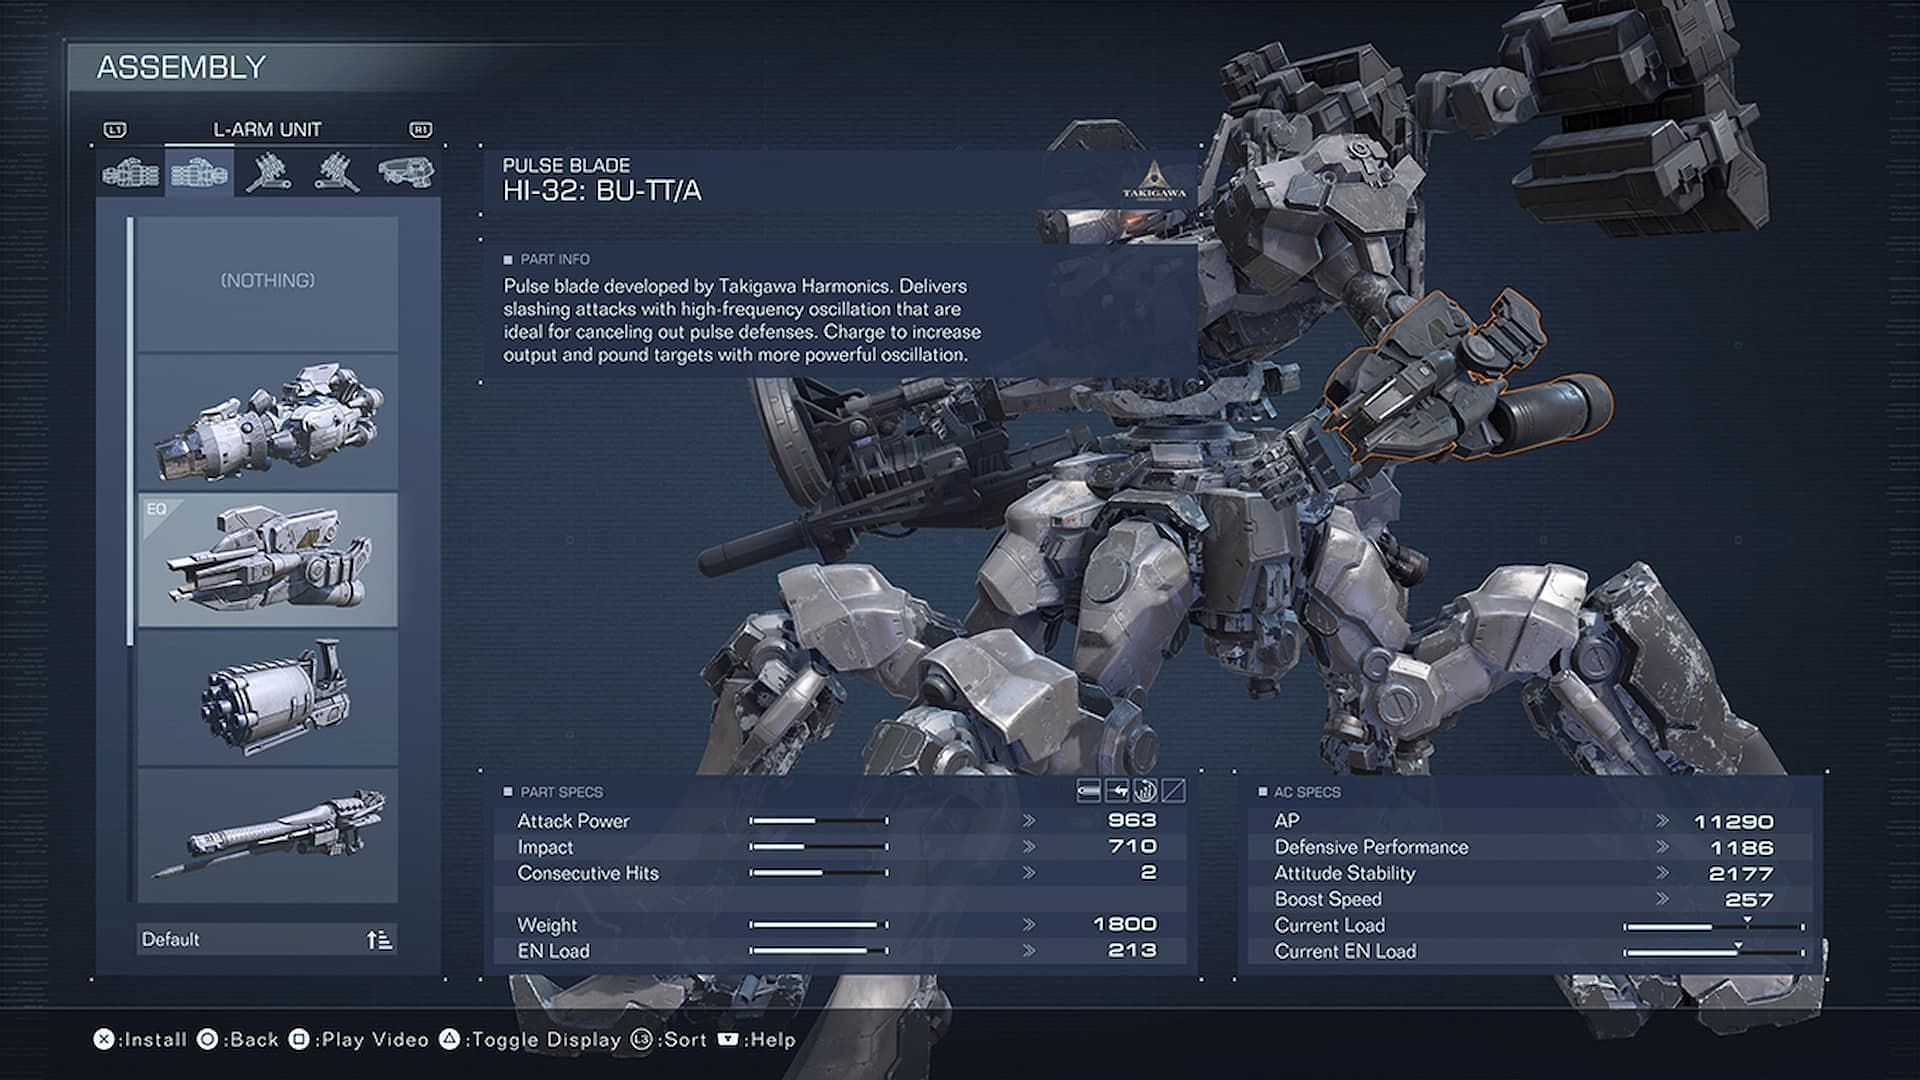 Pulse blade is a strong early-game pulse weapon in Armored Core 6 (Image via FromSoftware)